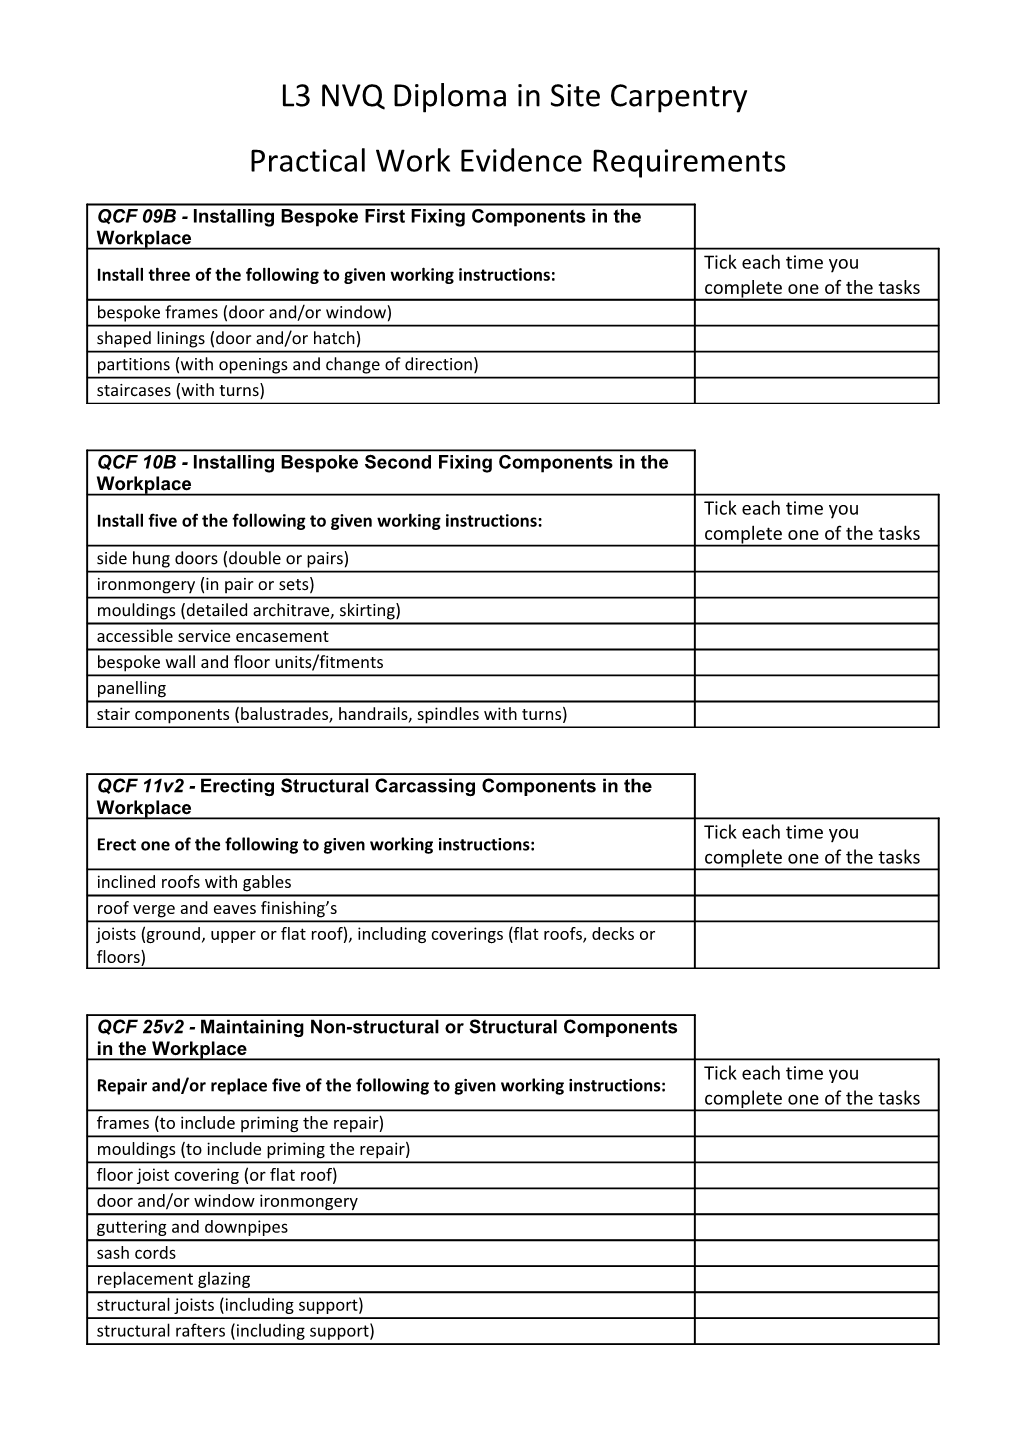 Practical Work Evidence Requirements